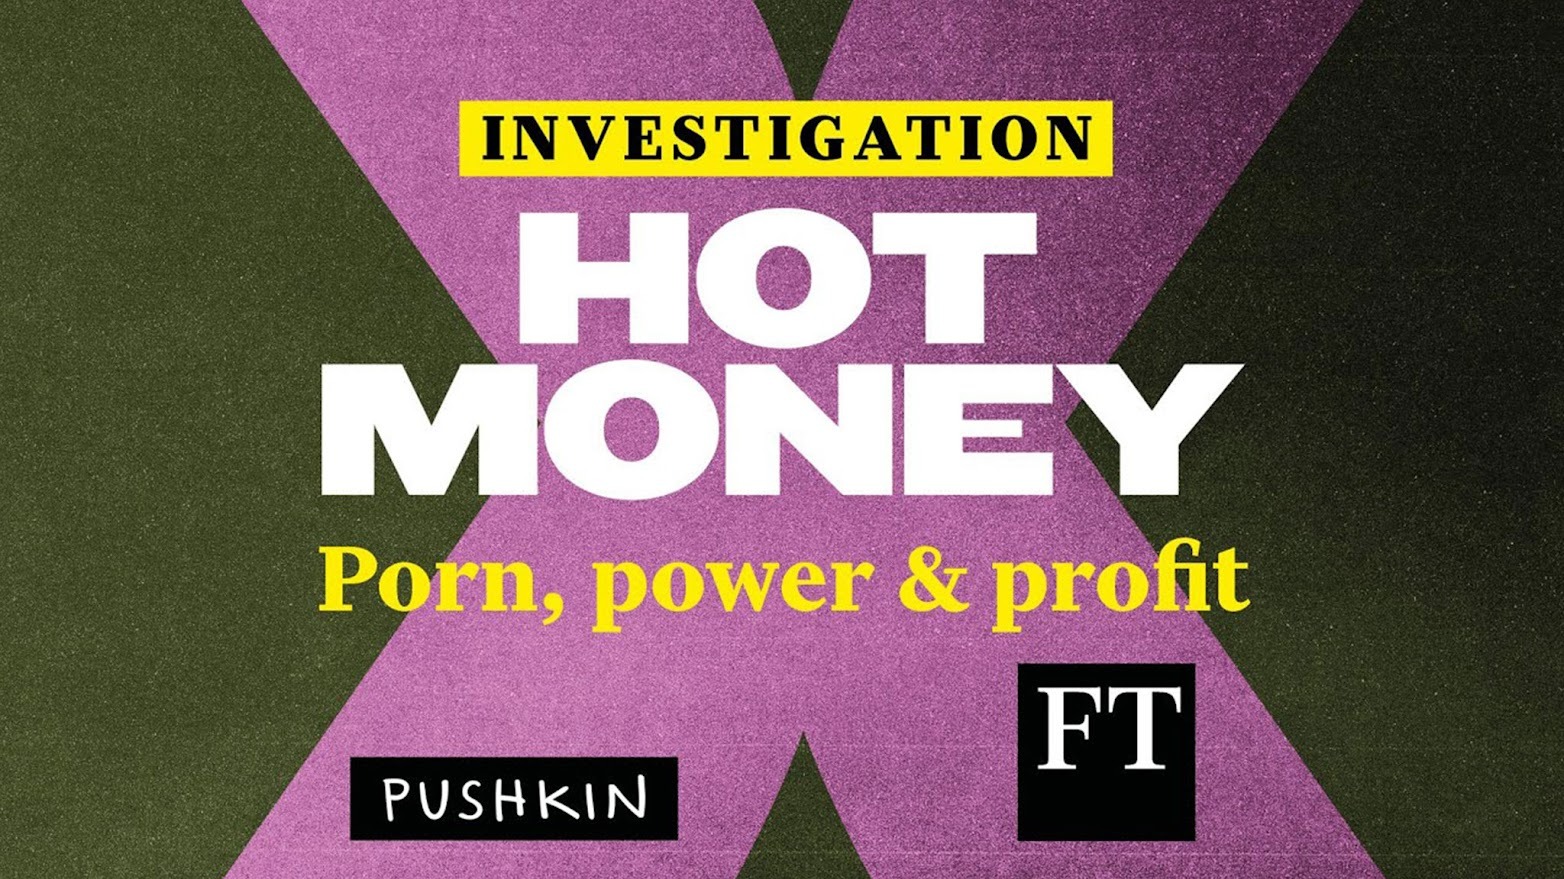 Knocking on the door of a porn empire | Financial Times